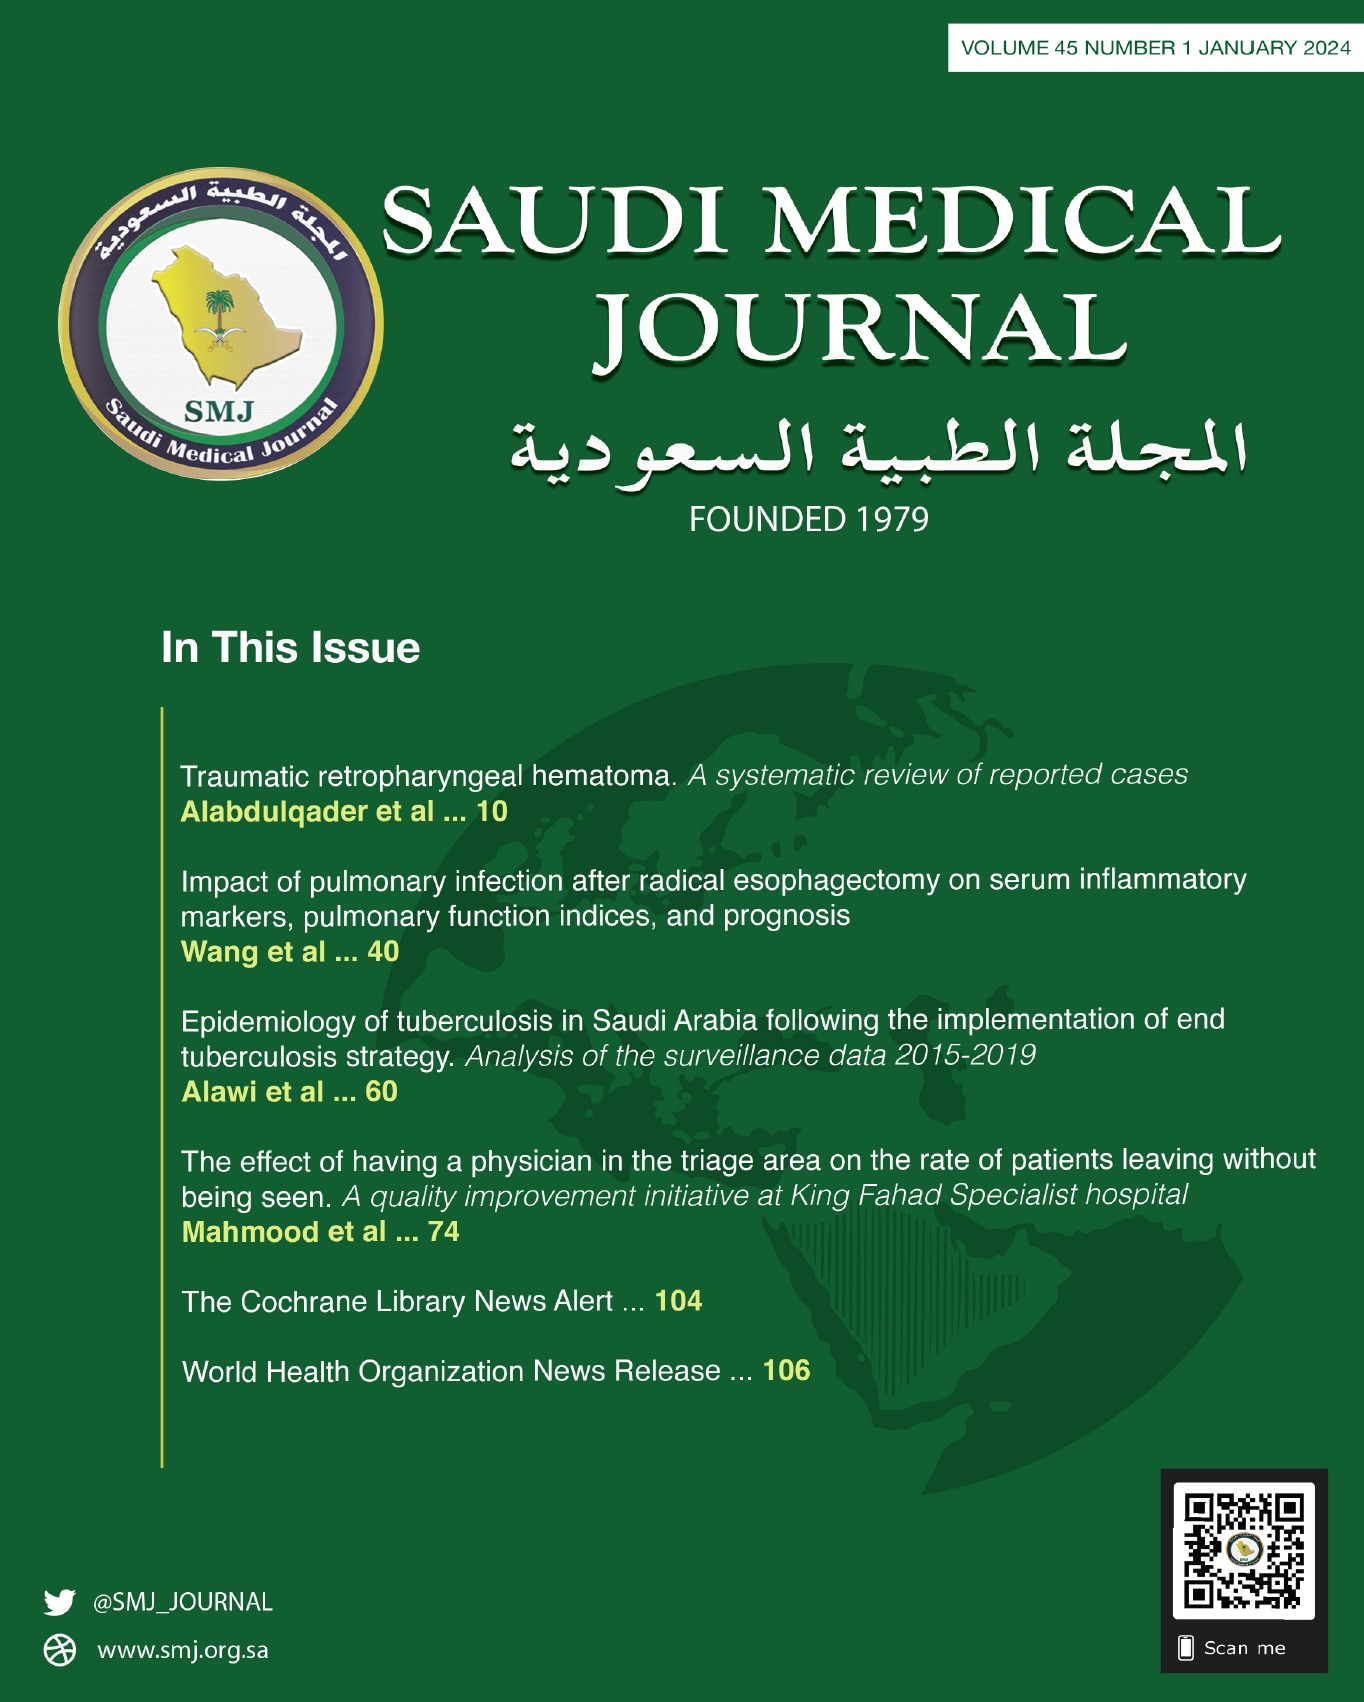 Epidemiology of tuberculosis in Saudi Arabia following the implementation of end tuberculosis strategy: Analysis of the surveillance data 2015-2019